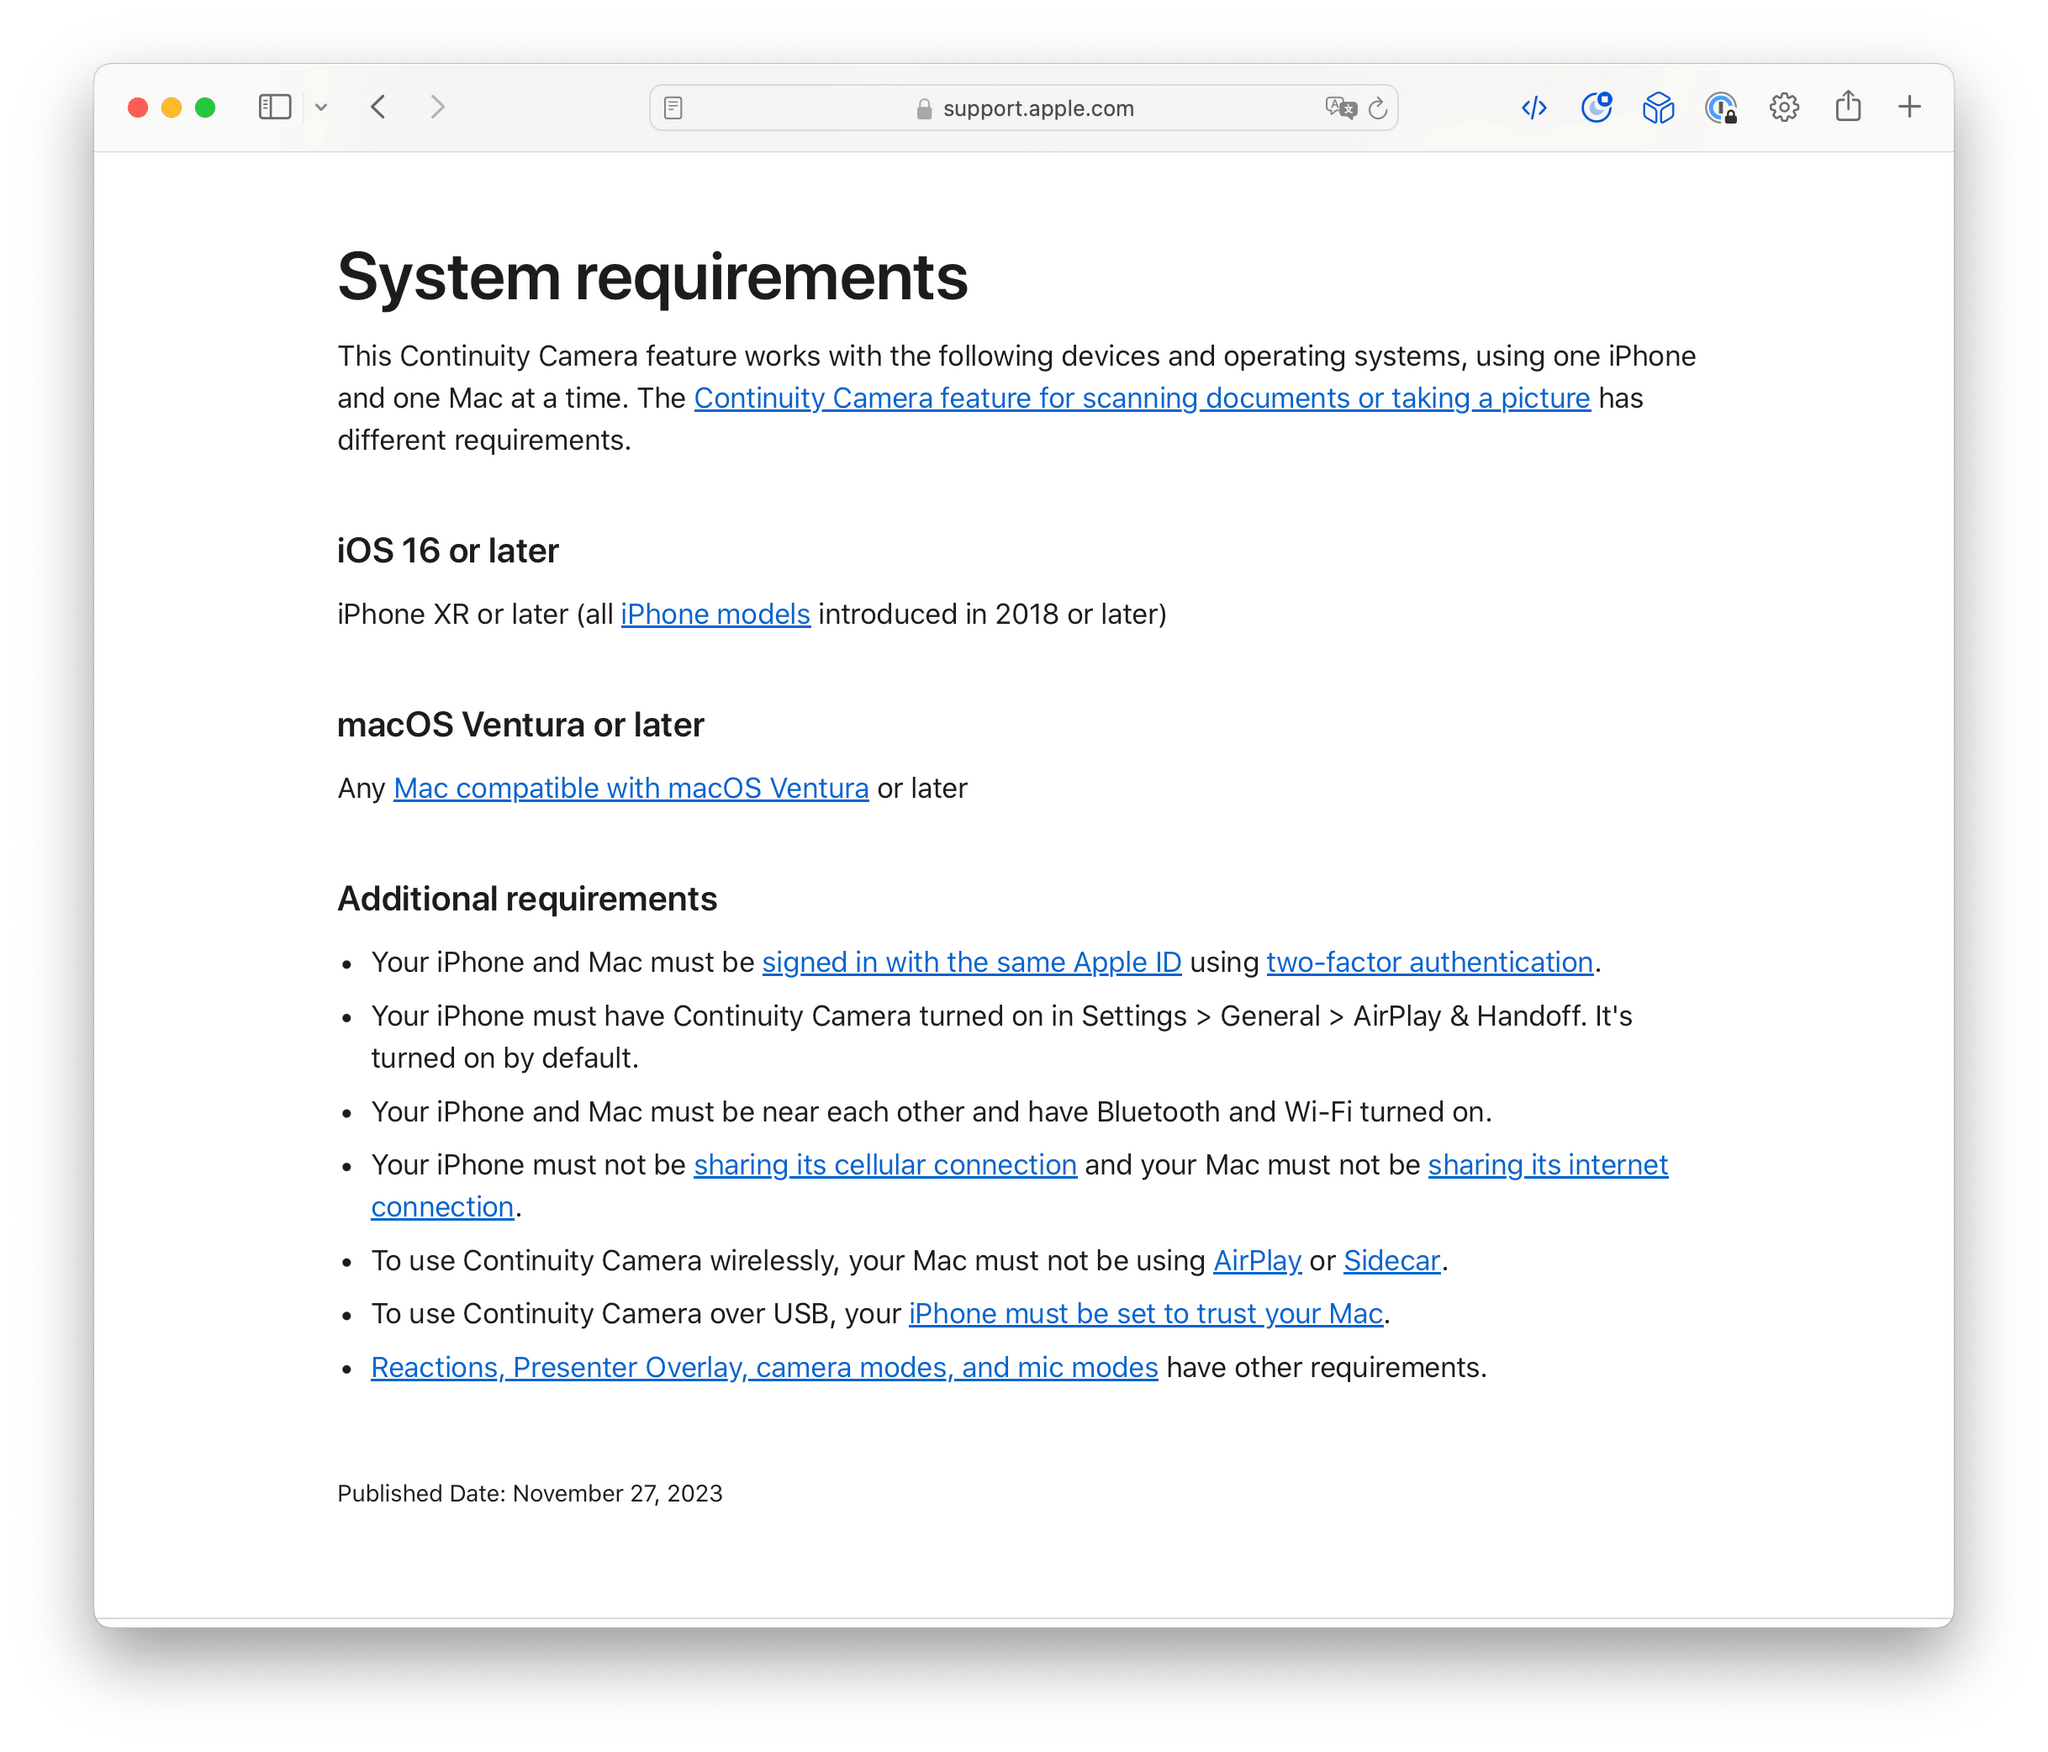 Despite meeting all the system requirements listed by Apple Support, Continuity Camera in wireless mode frequently stopped working on my Mac.